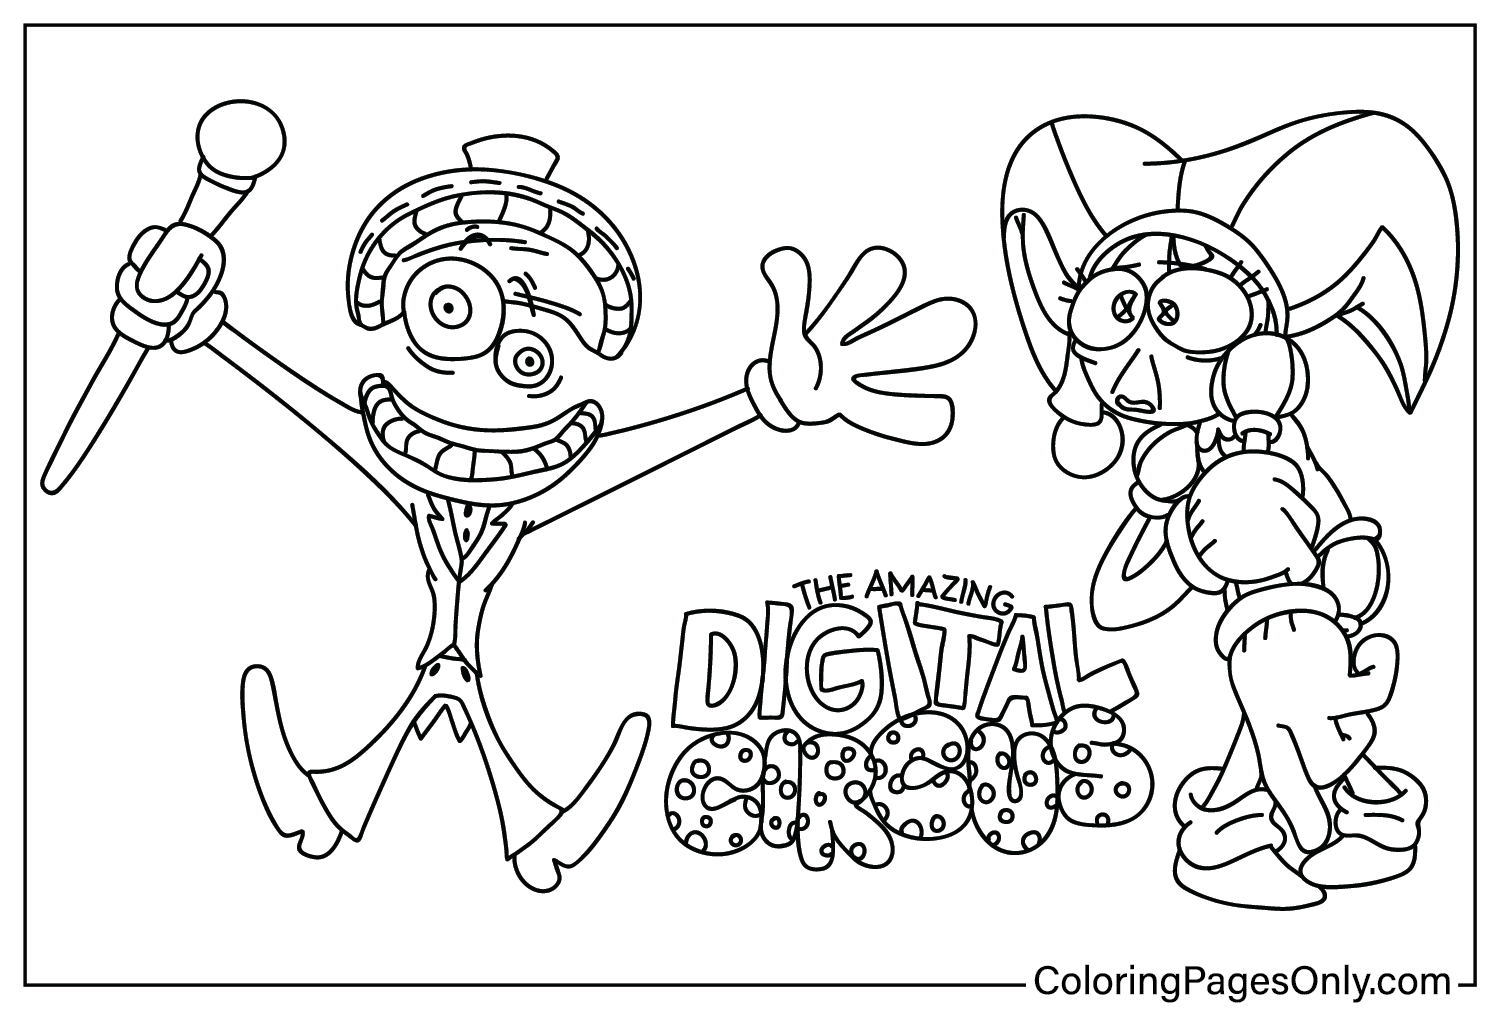 Free The Amazing Digital Circus Coloring Page from The Amazing Digital Circus